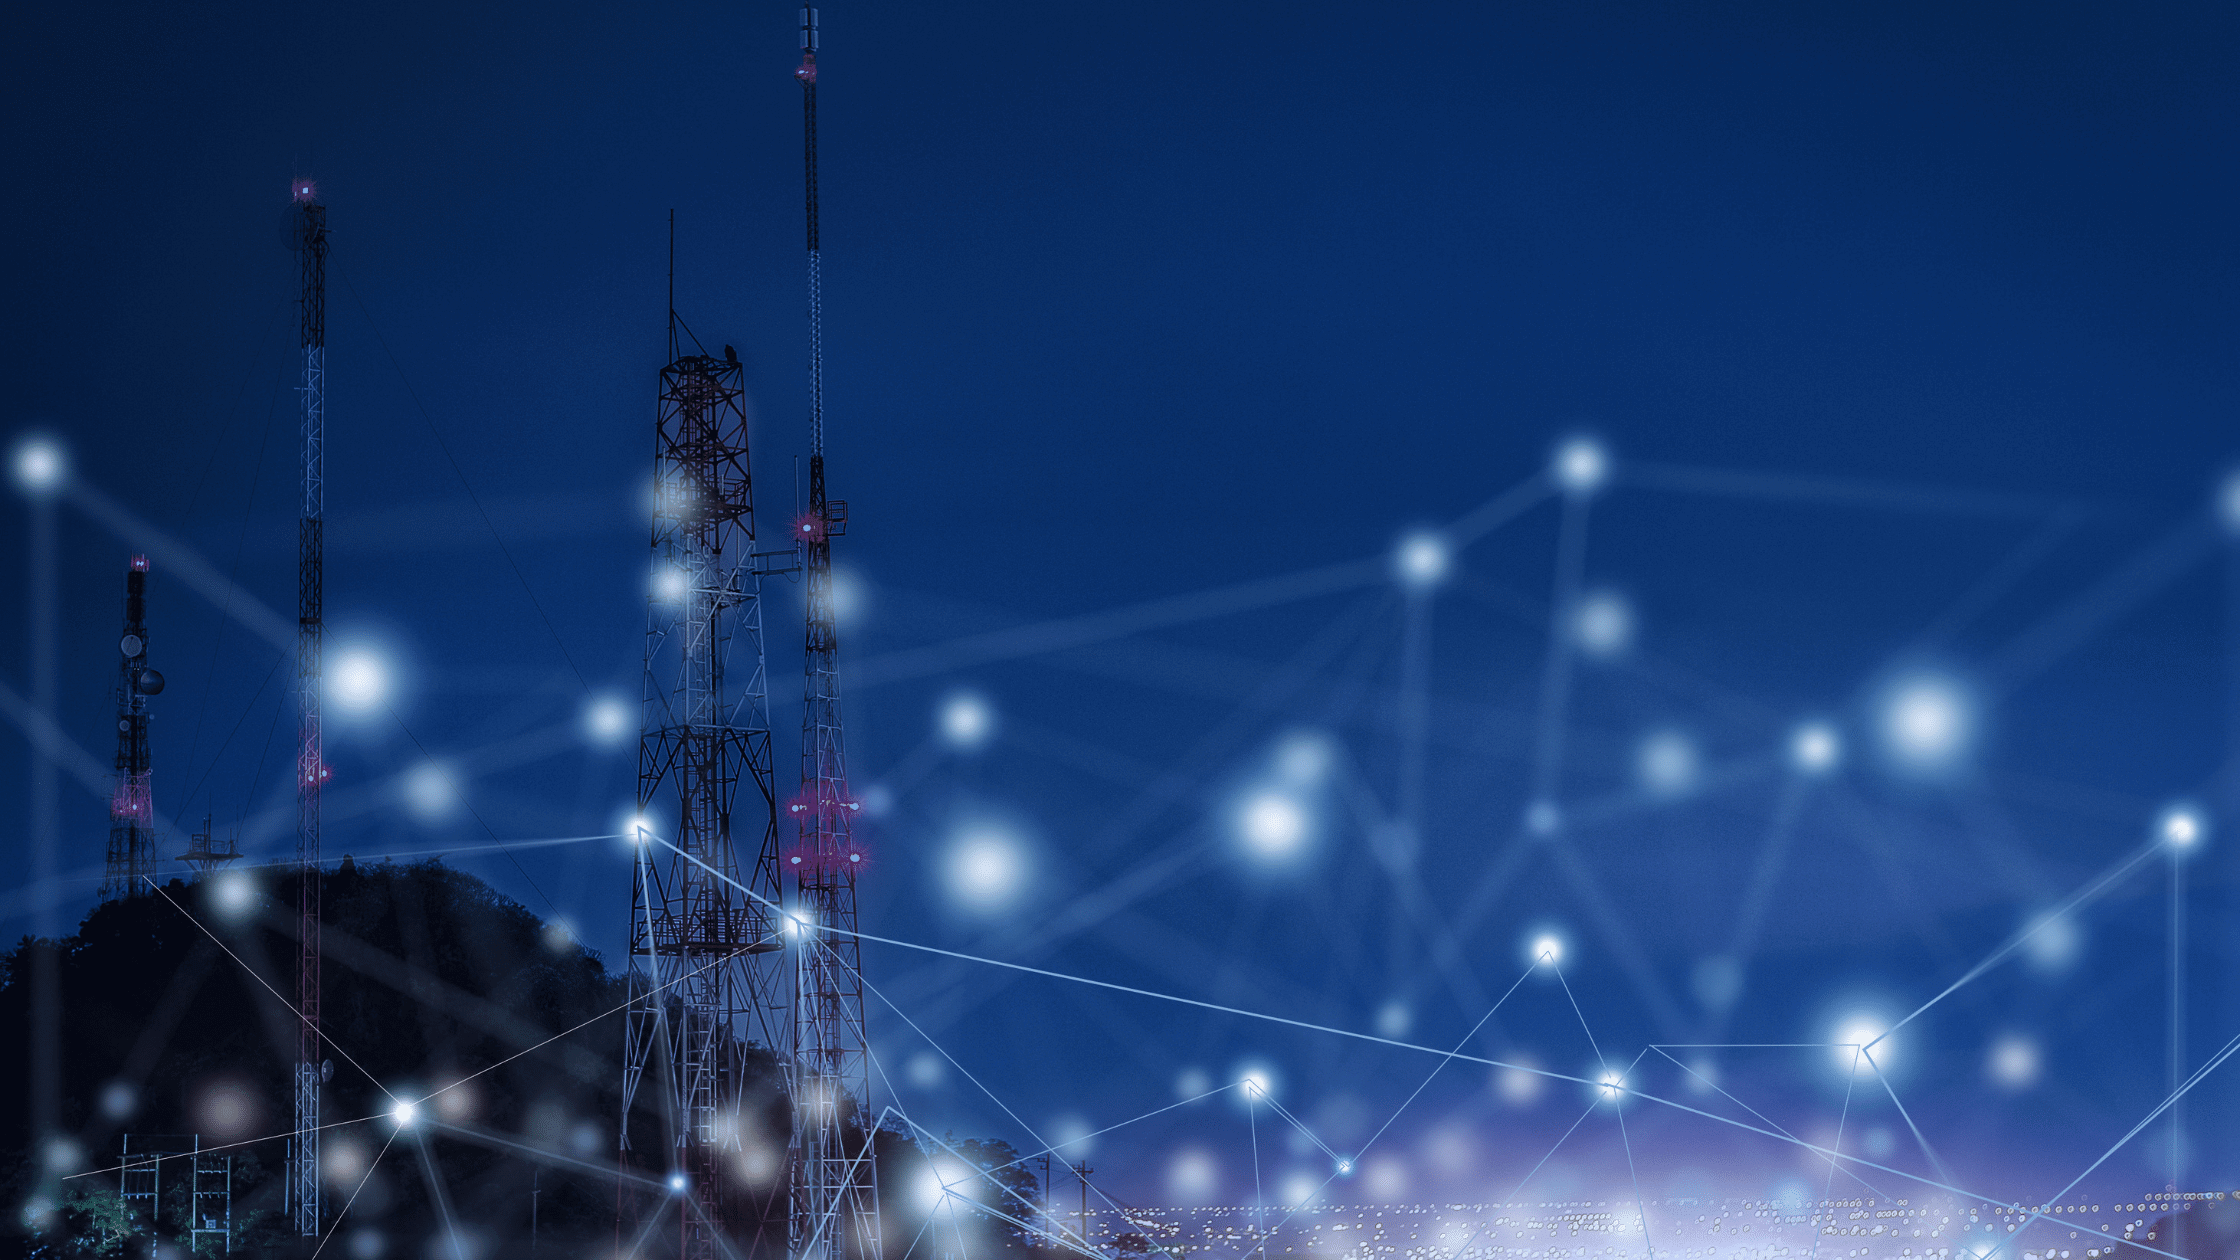 Telecom towers monitoring service uptime